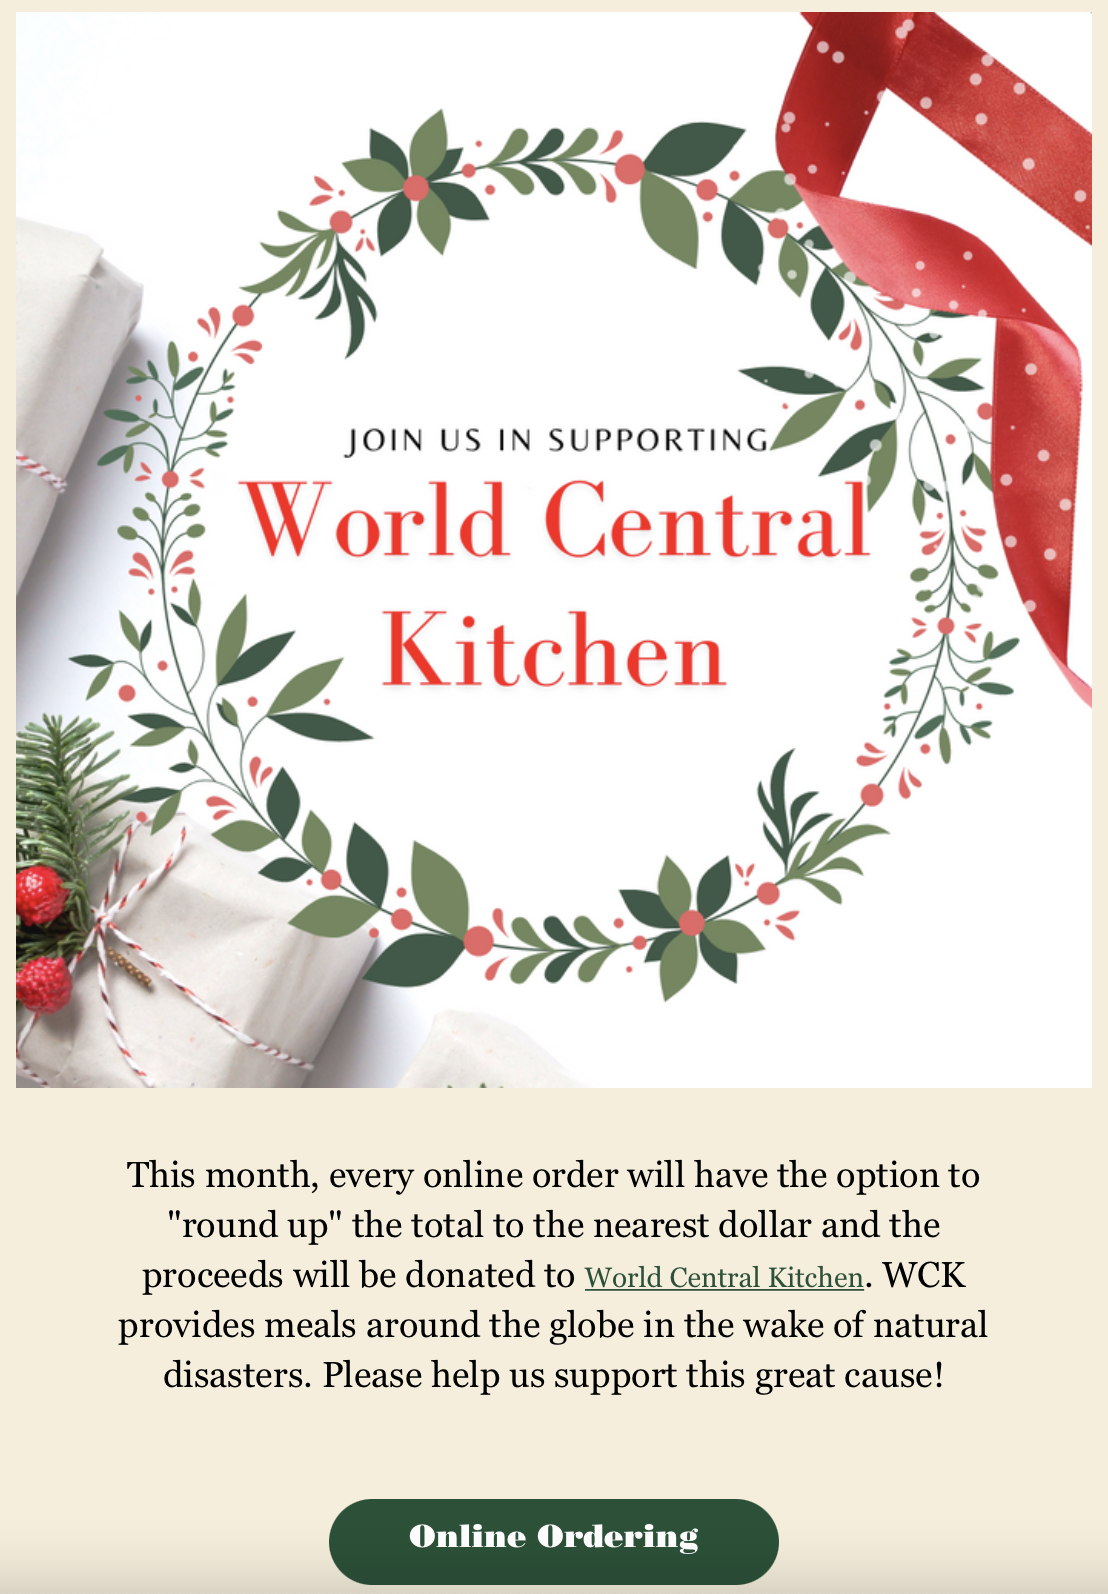 A screenshot of an email sent by Bobby V's Italian Pizzeria. The graphic is an illustrative holiday wreath with the heading "join us in supporting World Central Kitchen" and the button reads "online ordering" 